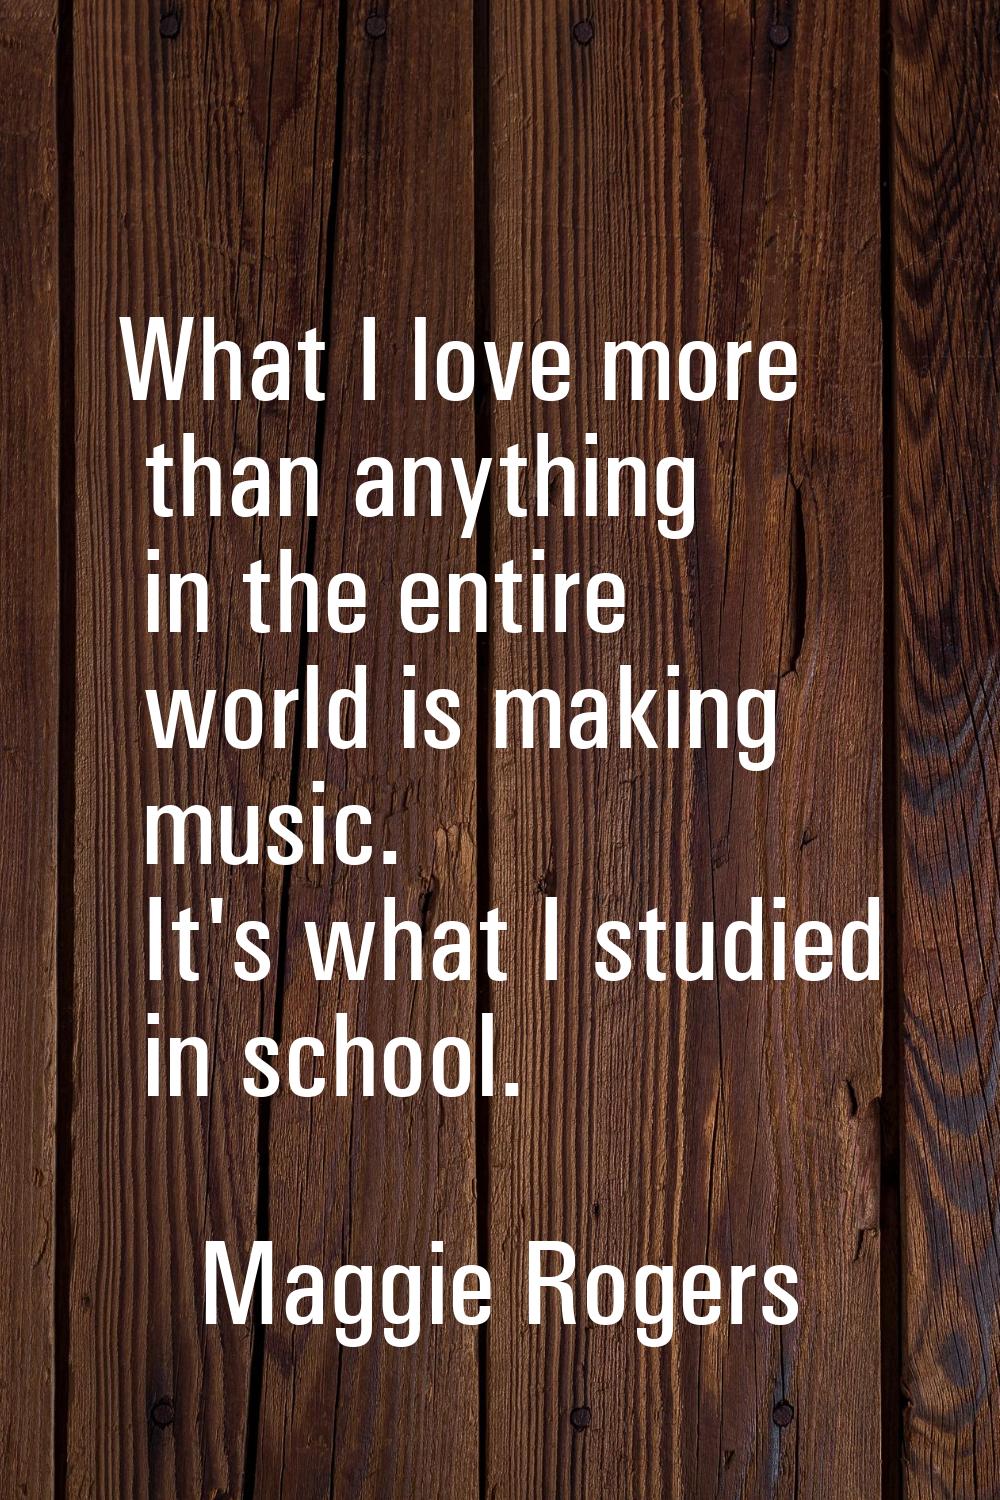 What I love more than anything in the entire world is making music. It's what I studied in school.